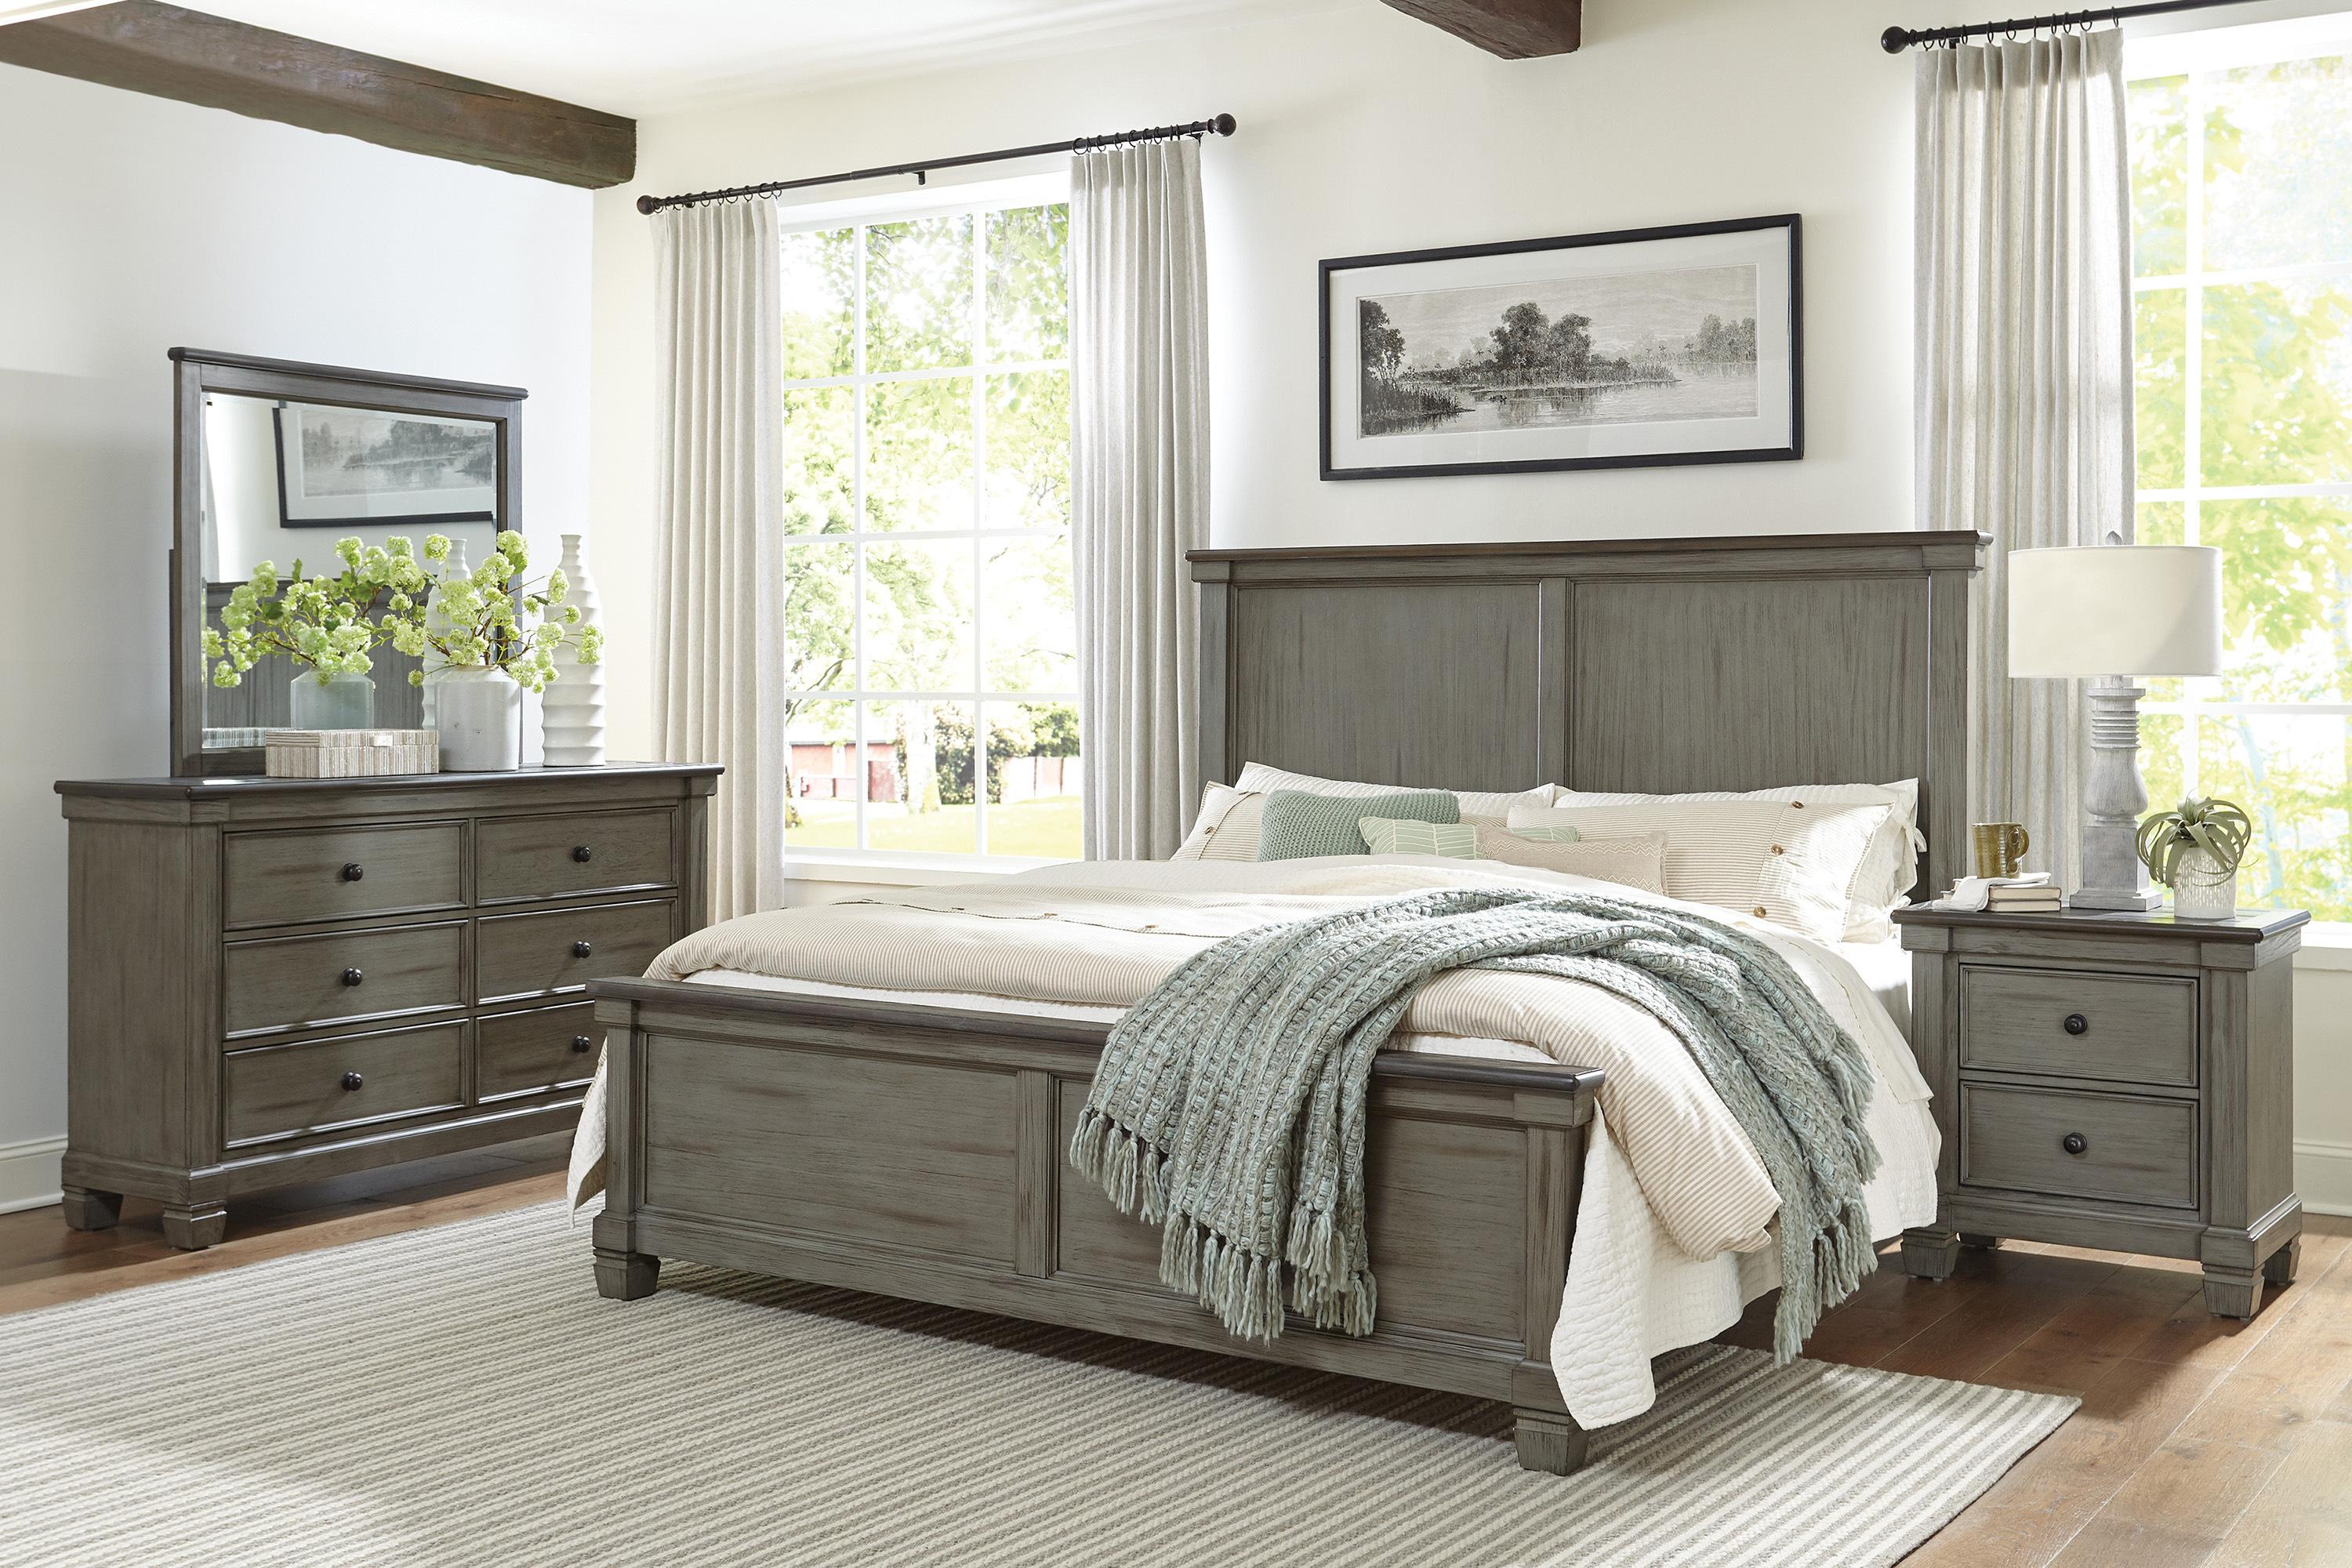 

    
Transitional Antique Gray & Coffee Wood Queen Bedroom Set 5pcs Homelegance 1626GY-1* Weaver
